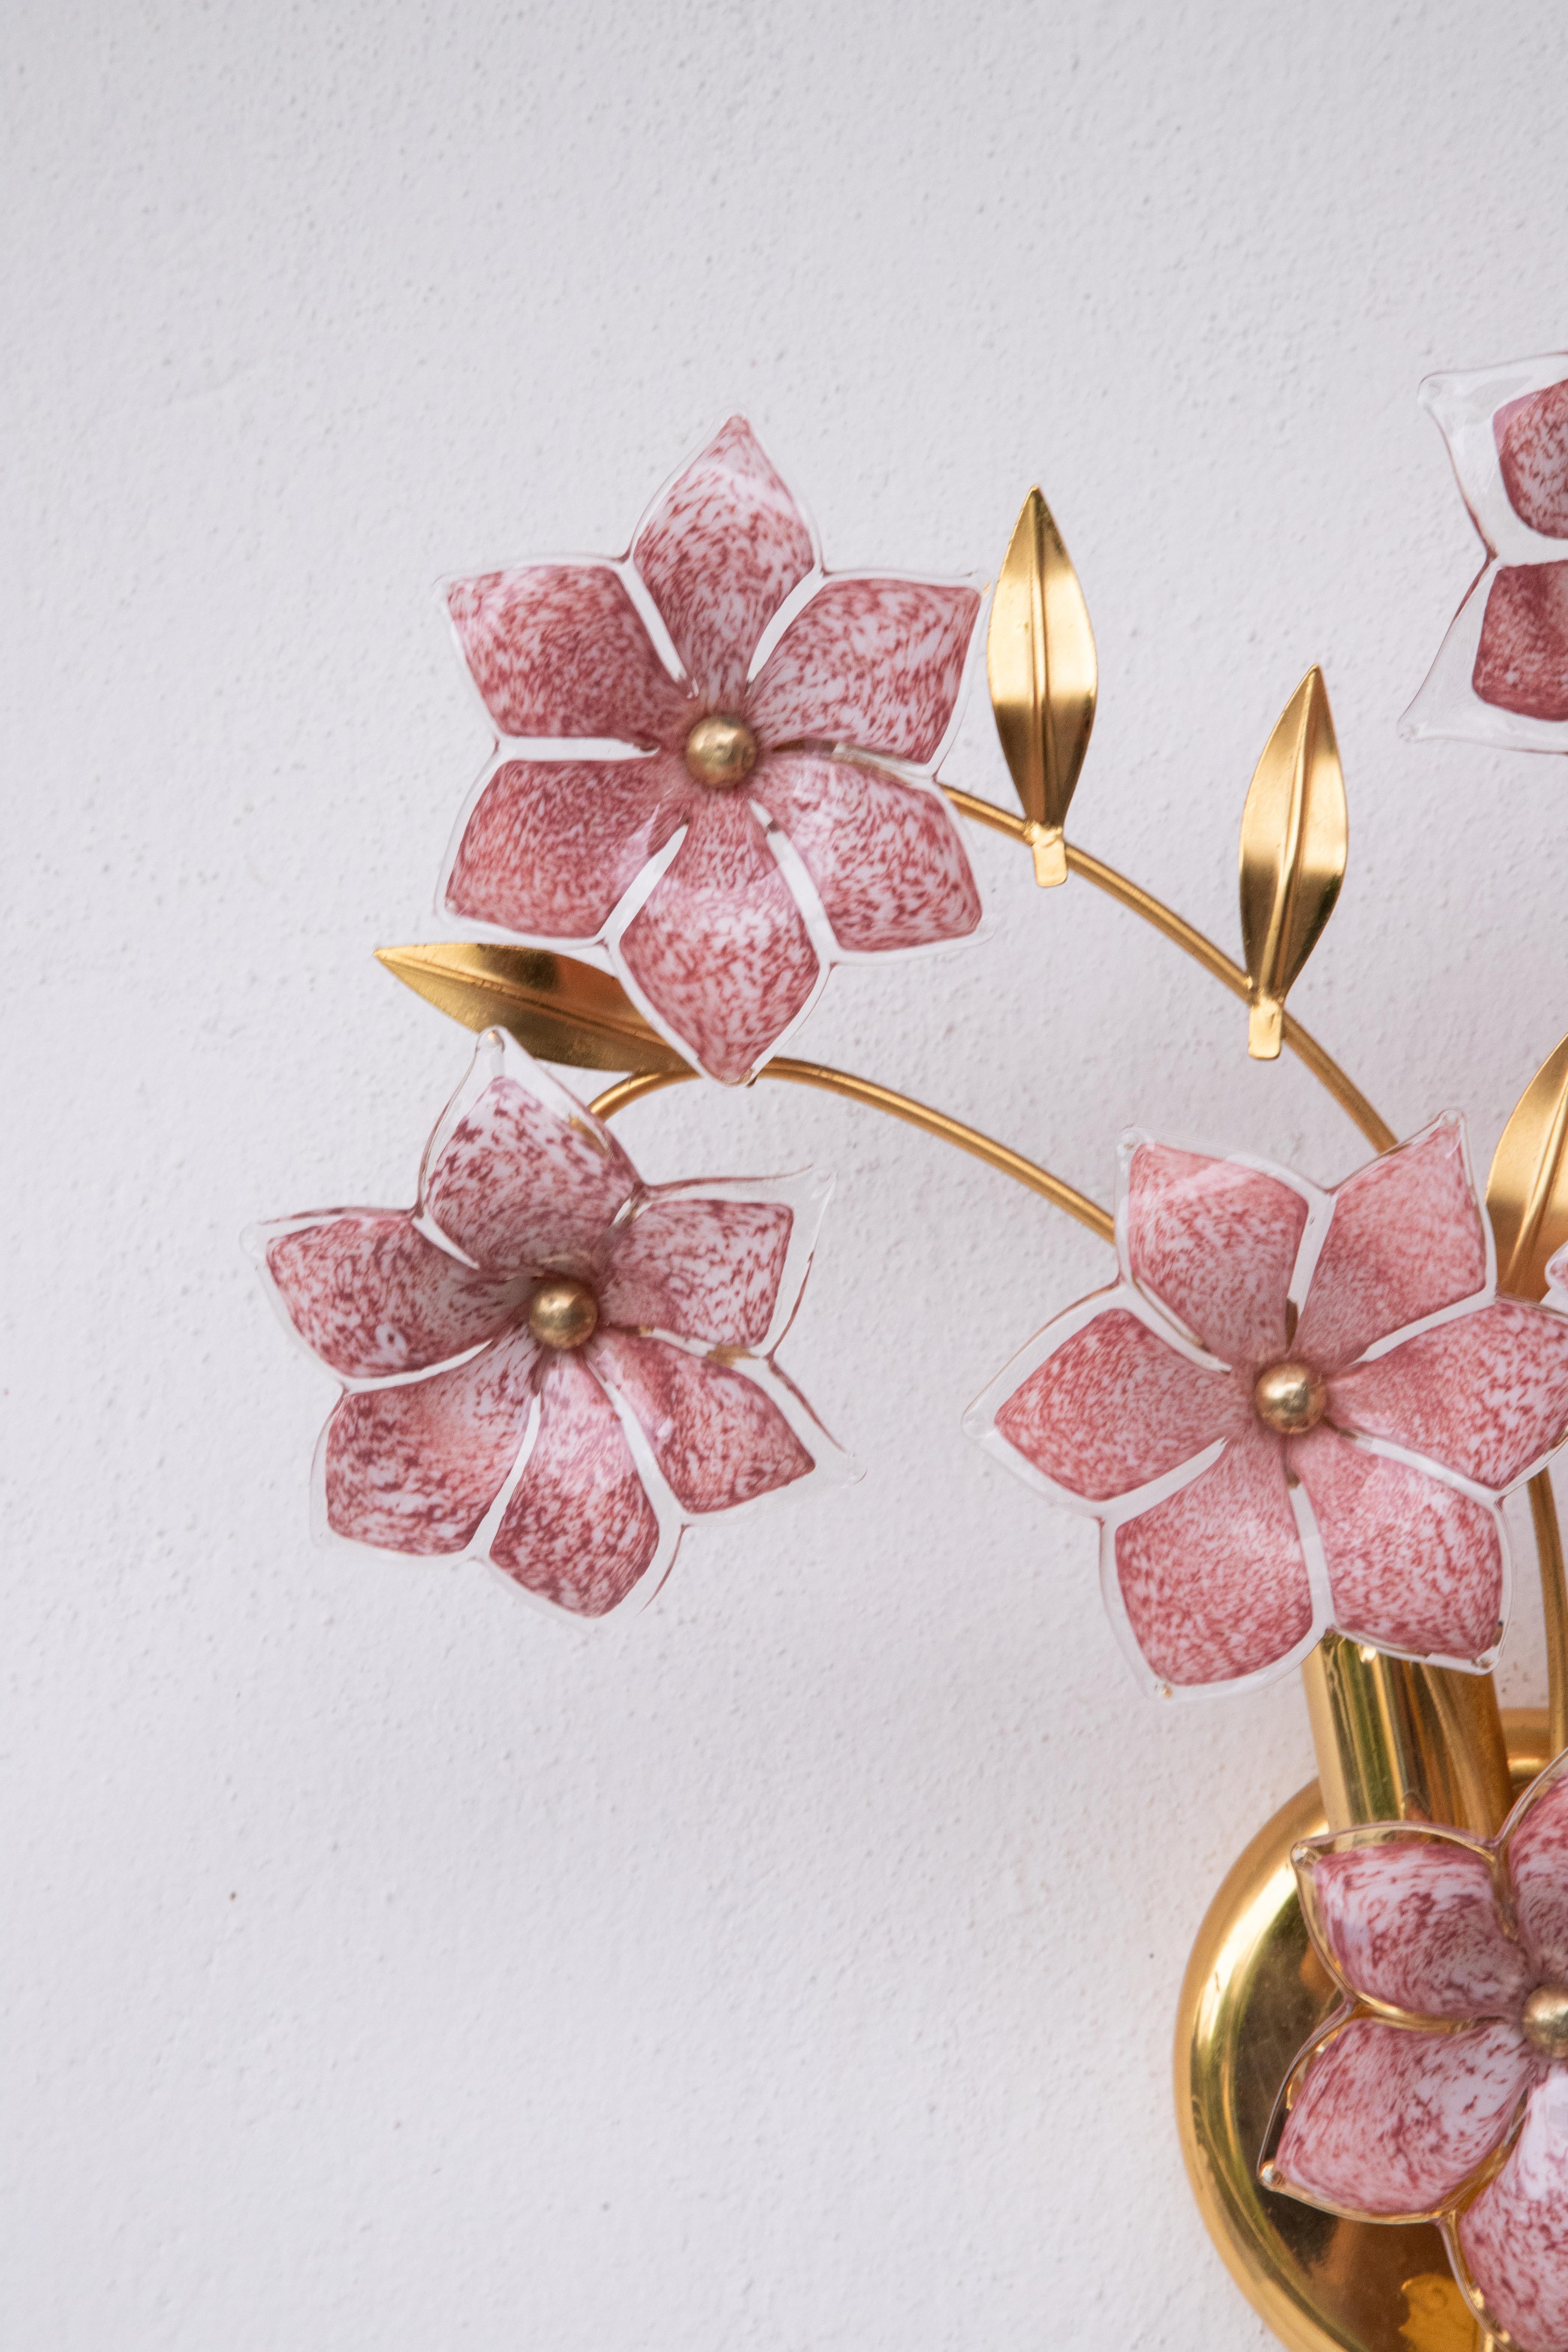 Pretty wall light with Murano glass pink flowers.
Accommodates two E14 screw-in bulbs, European standards, possible replace for Us standard.
Measurements:
44 cm width
Height 45 cm
13 cm depth